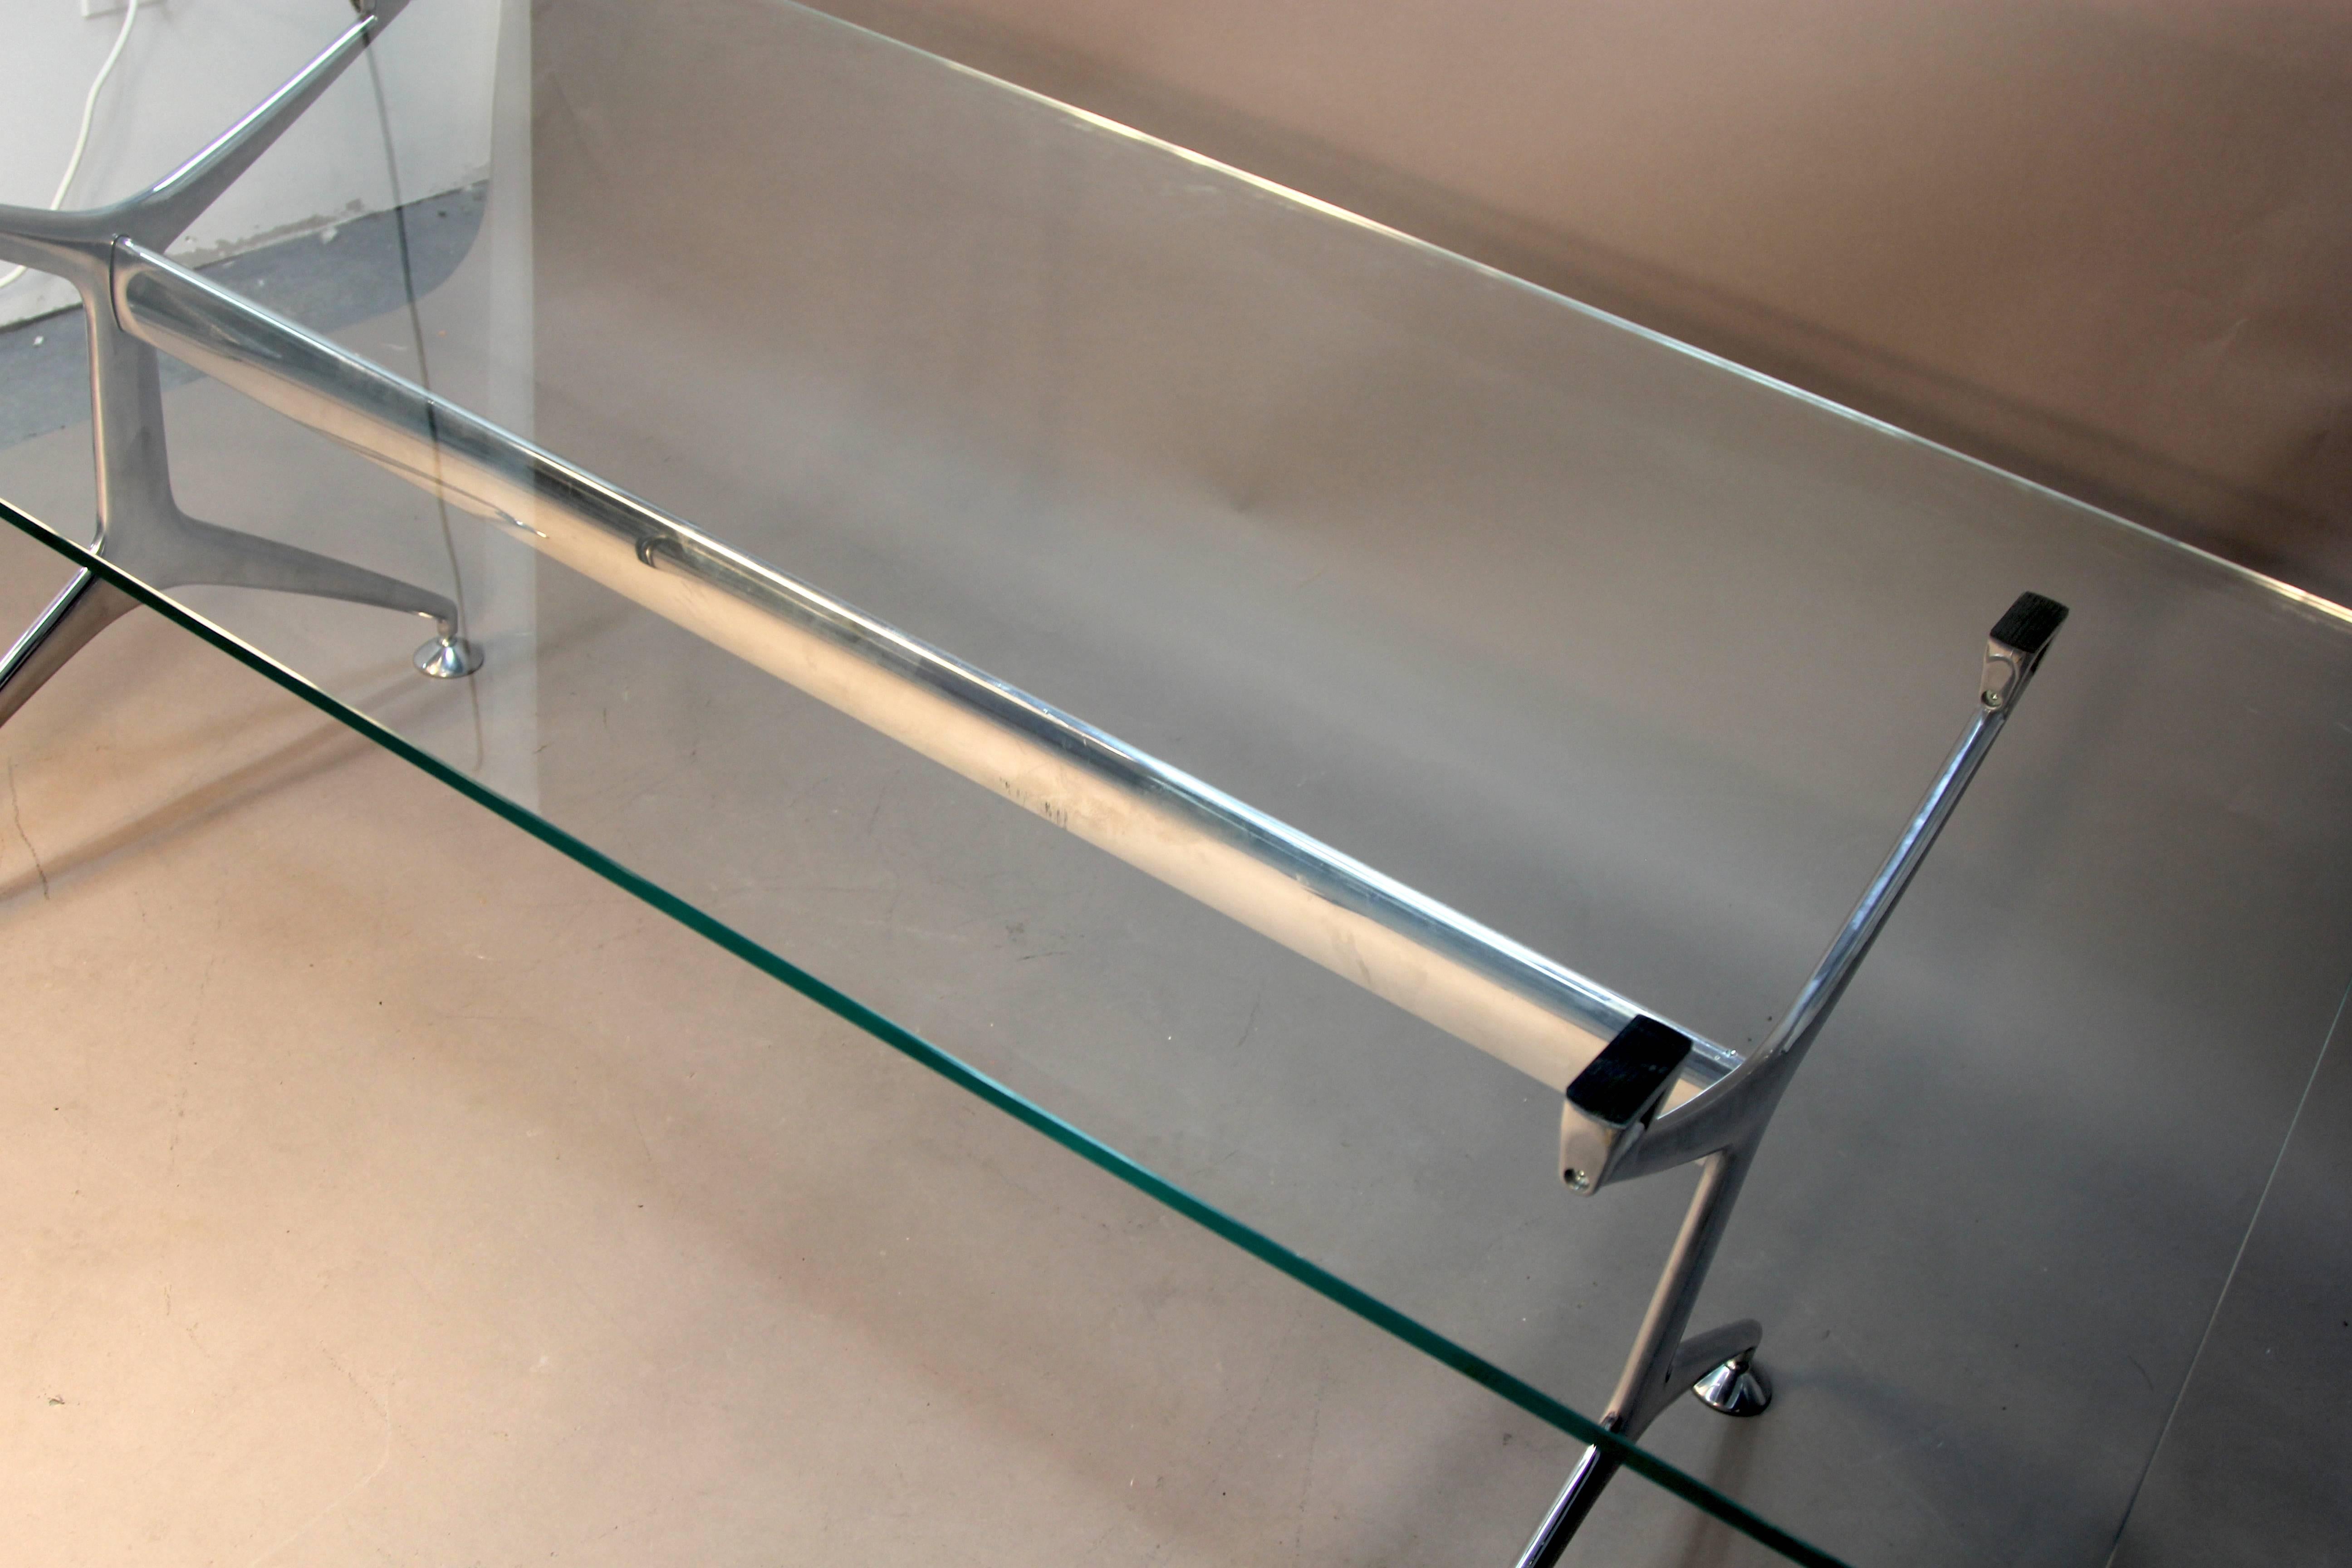 Very stylish and functional, the chrome base can accommodate a number of different tops. Included is a glass top measures 36 x 72 perfect for an office desk. Sleek lines and beautiful design make this a statement piece in any office or dining room.